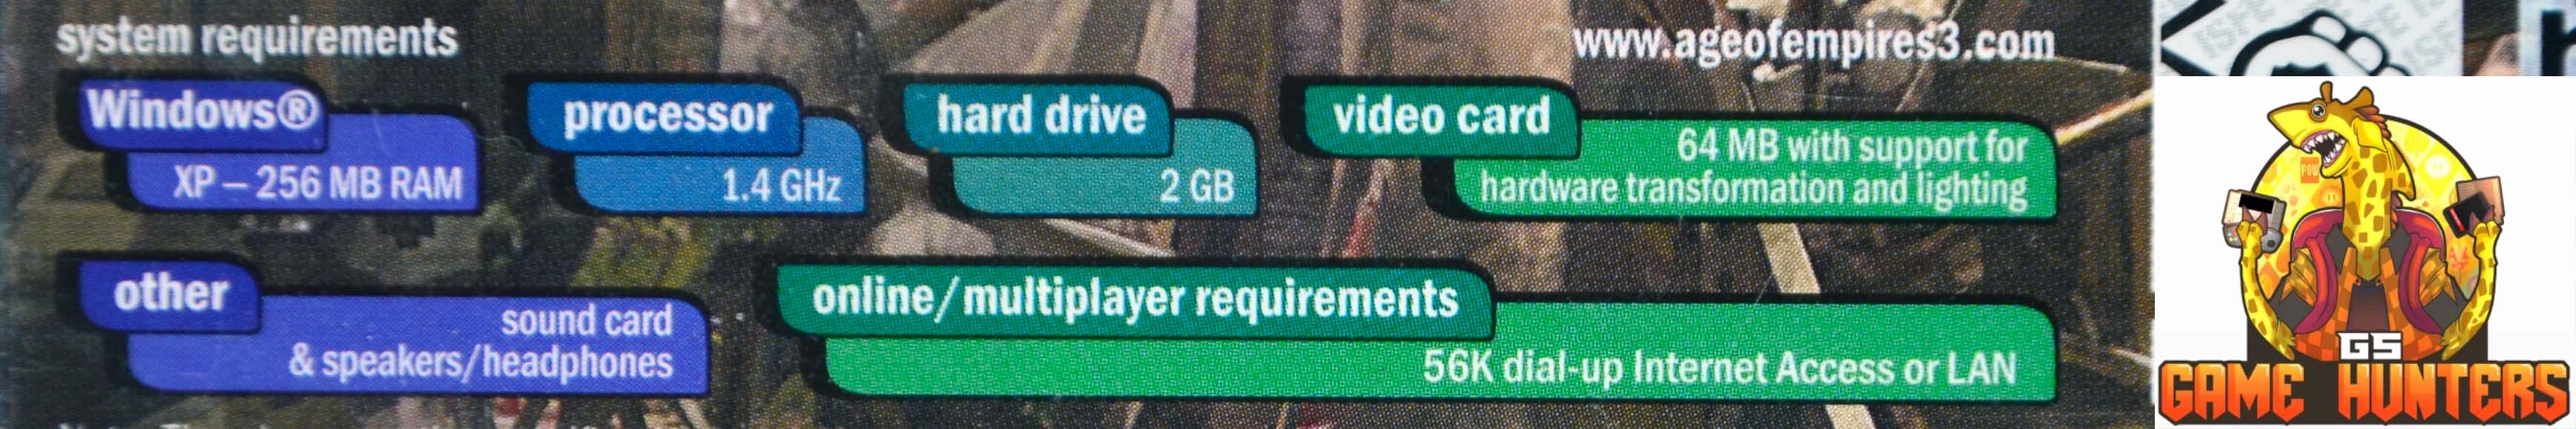 Age of Empires III System Requirements.jpg Age of Empires III  by GSGAMEHUNTERS